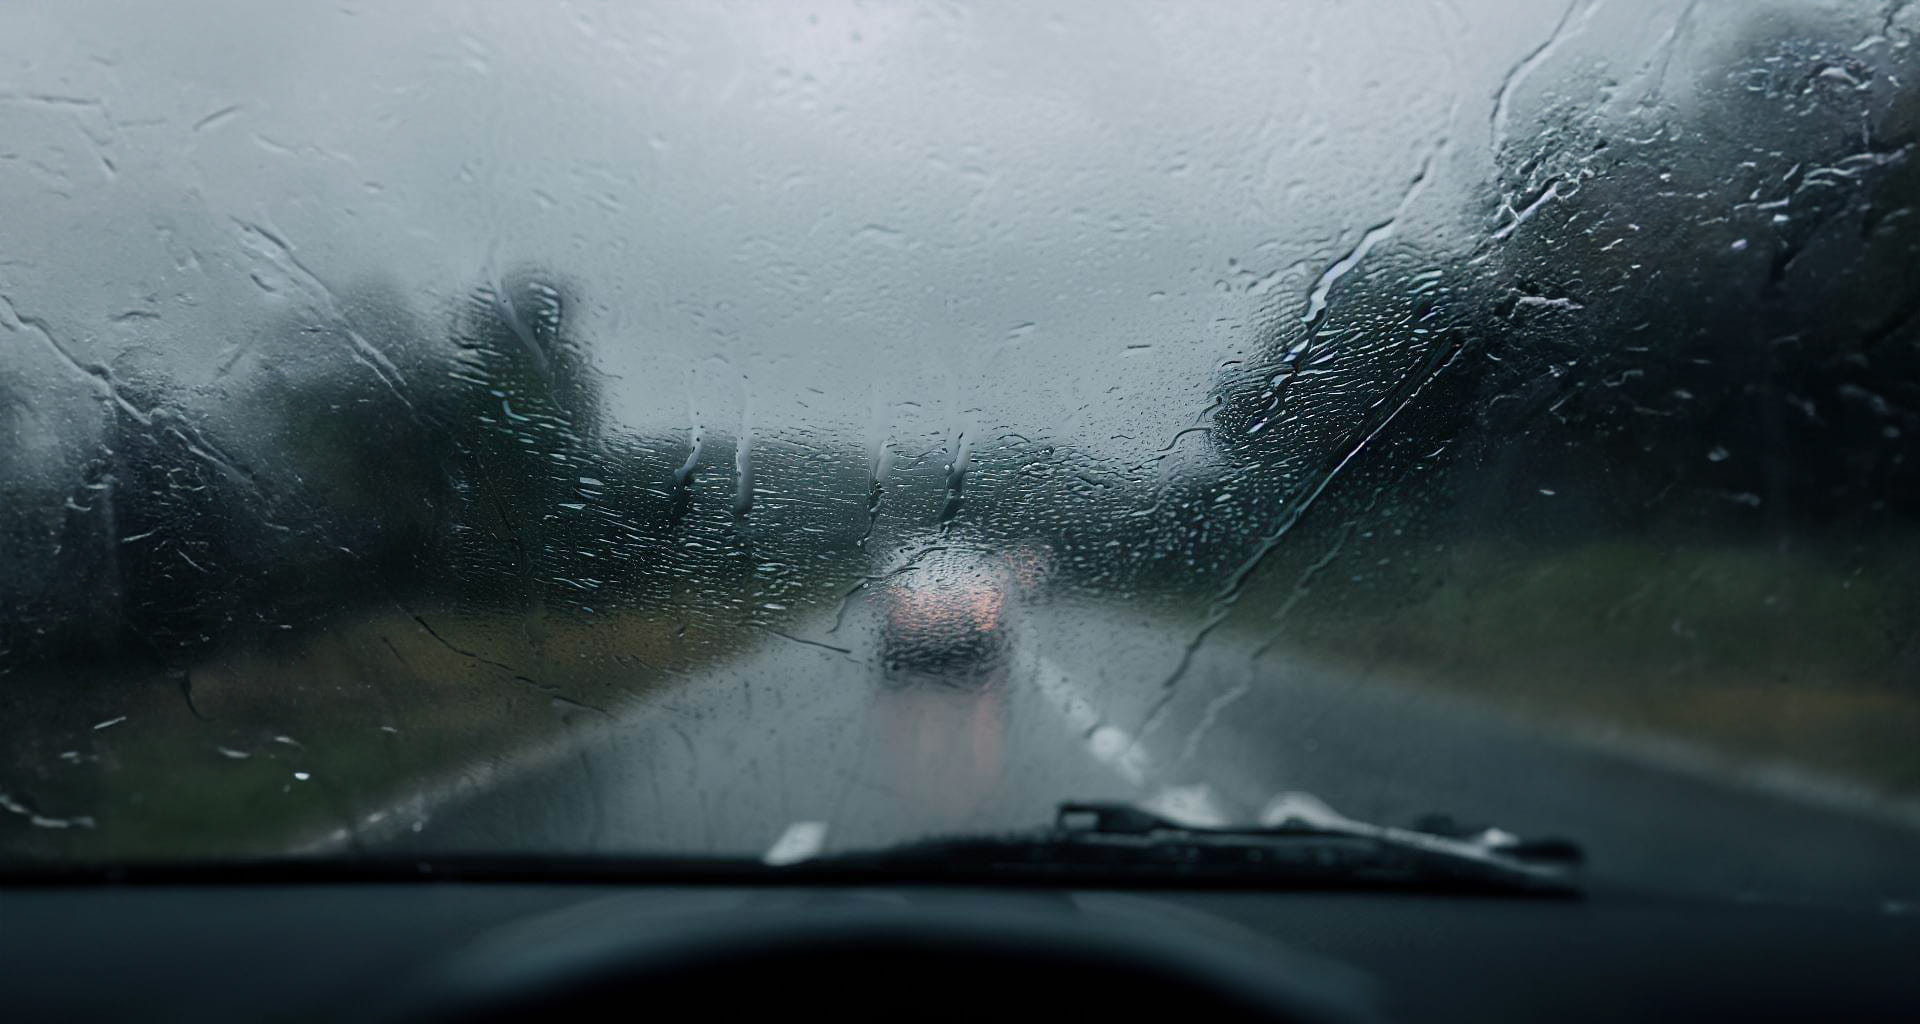 How Often Should I Change My Windshield Wipers